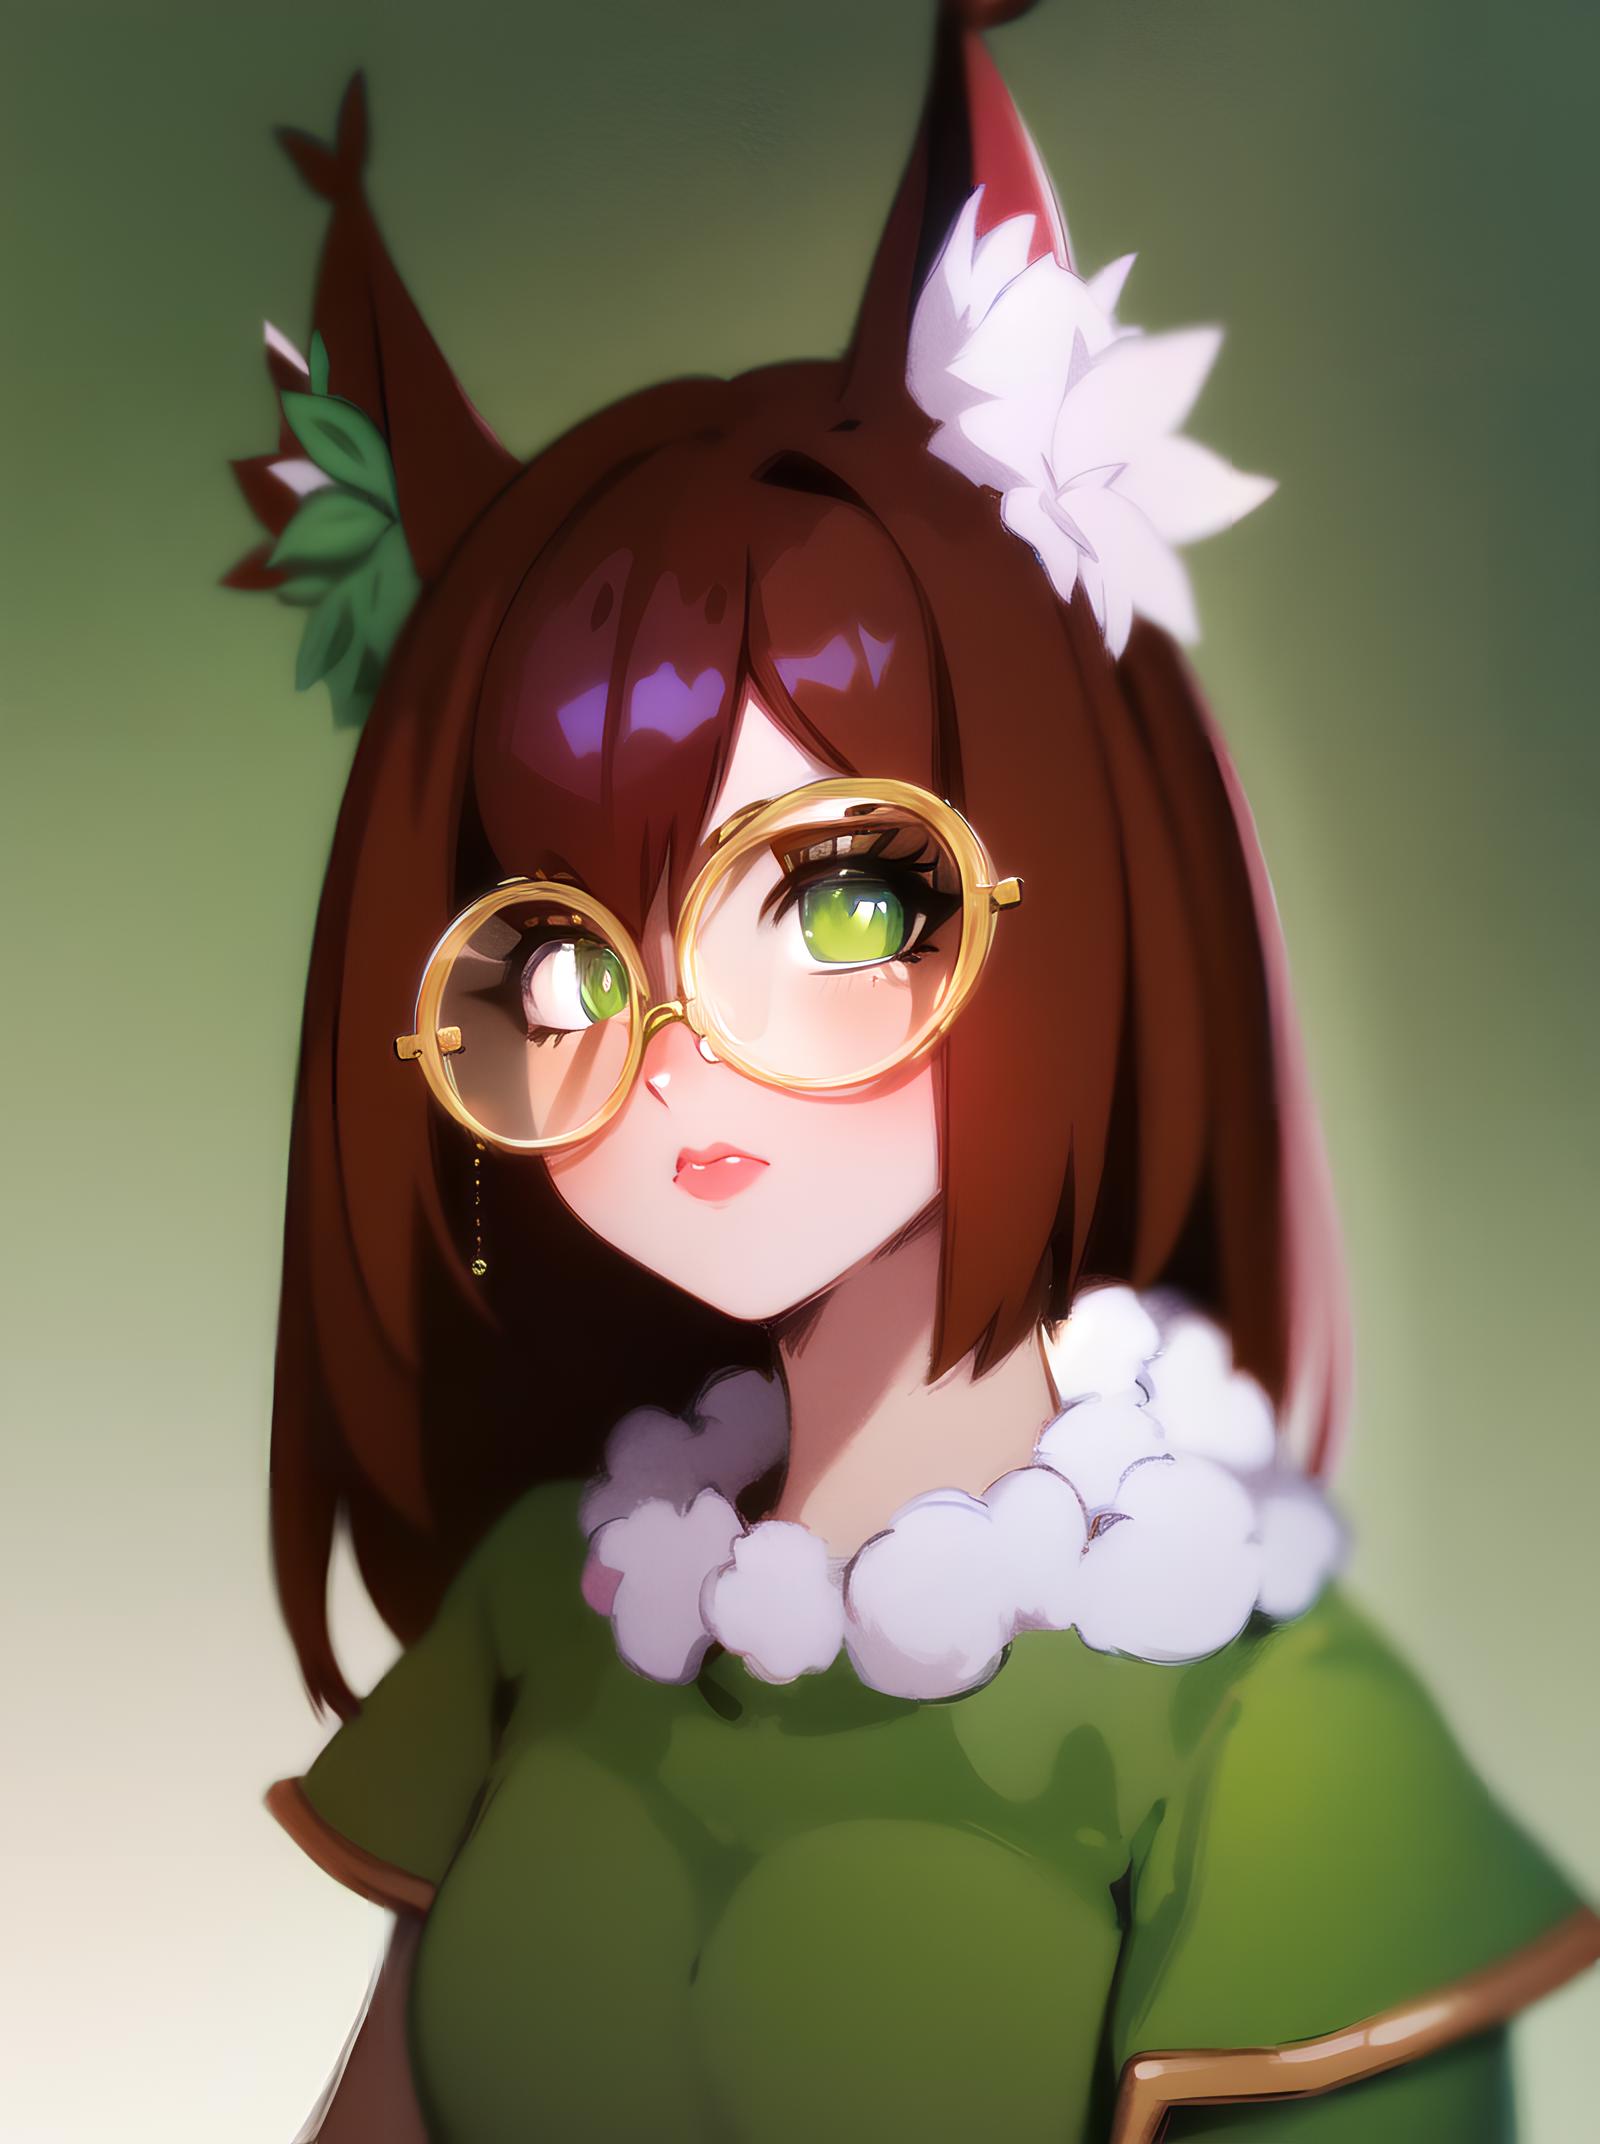 Froggy Tyan Vtuber image by aliceignore